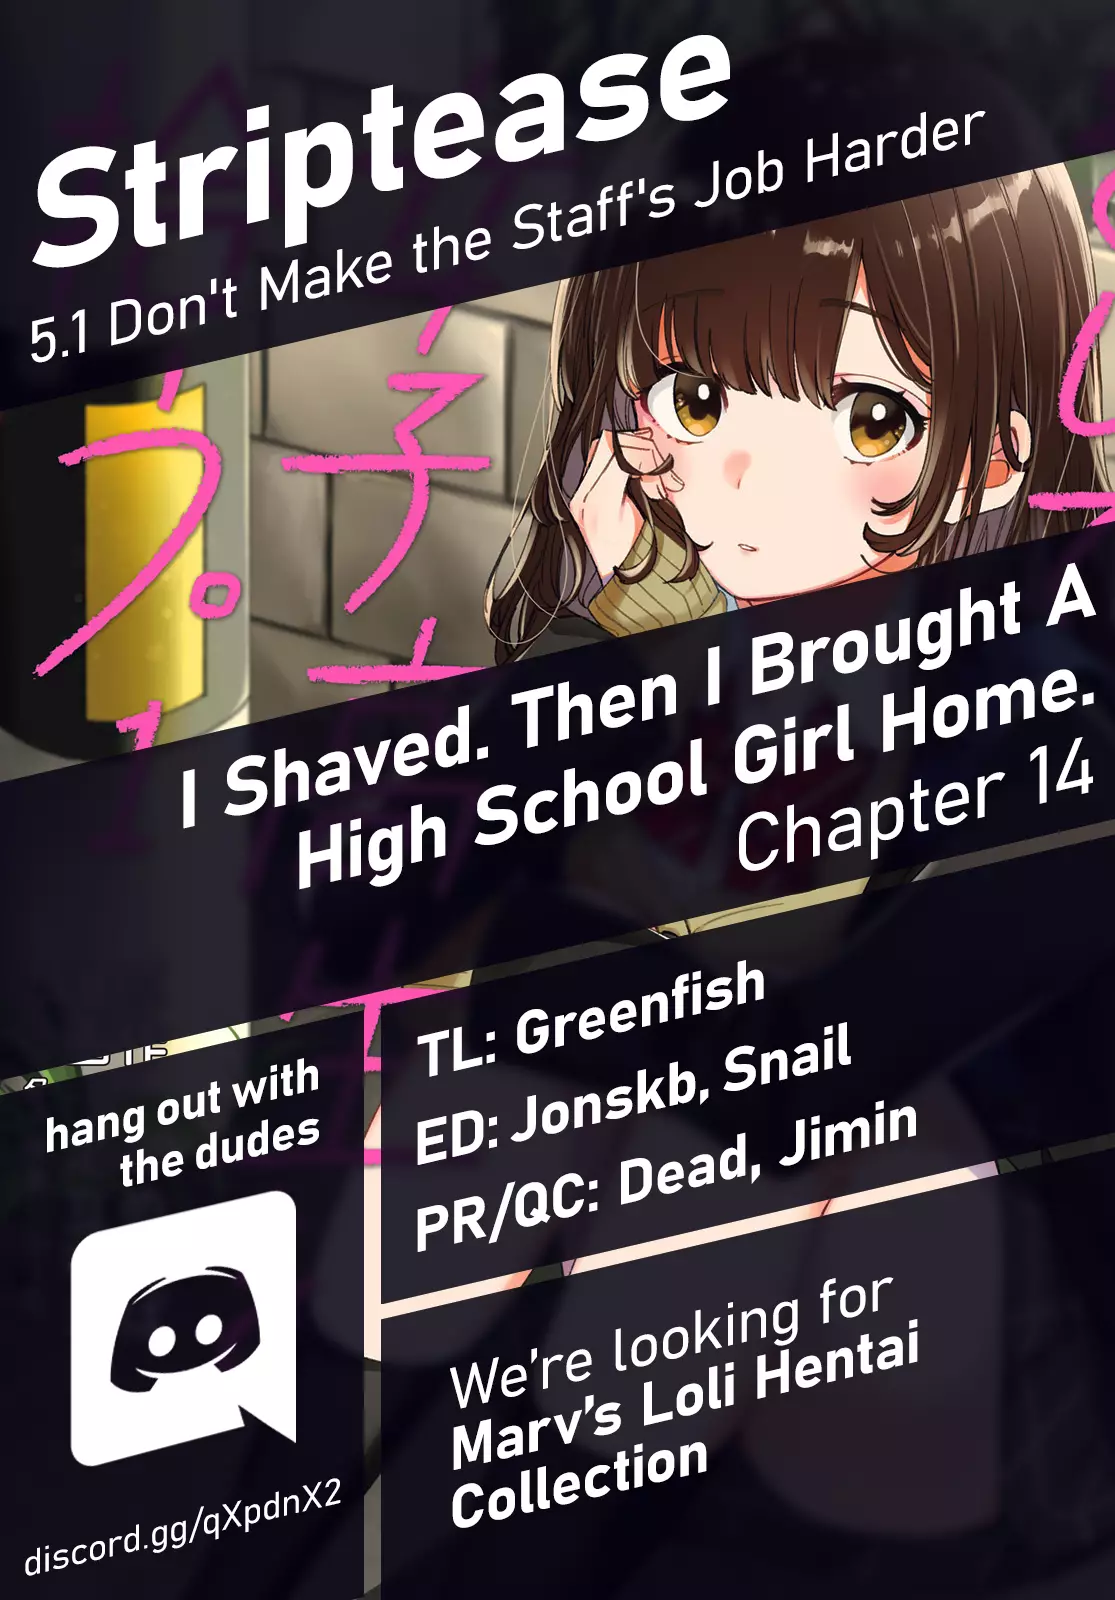 I Shaved. Then I Brought a High School Girl Home. - 14 page 1